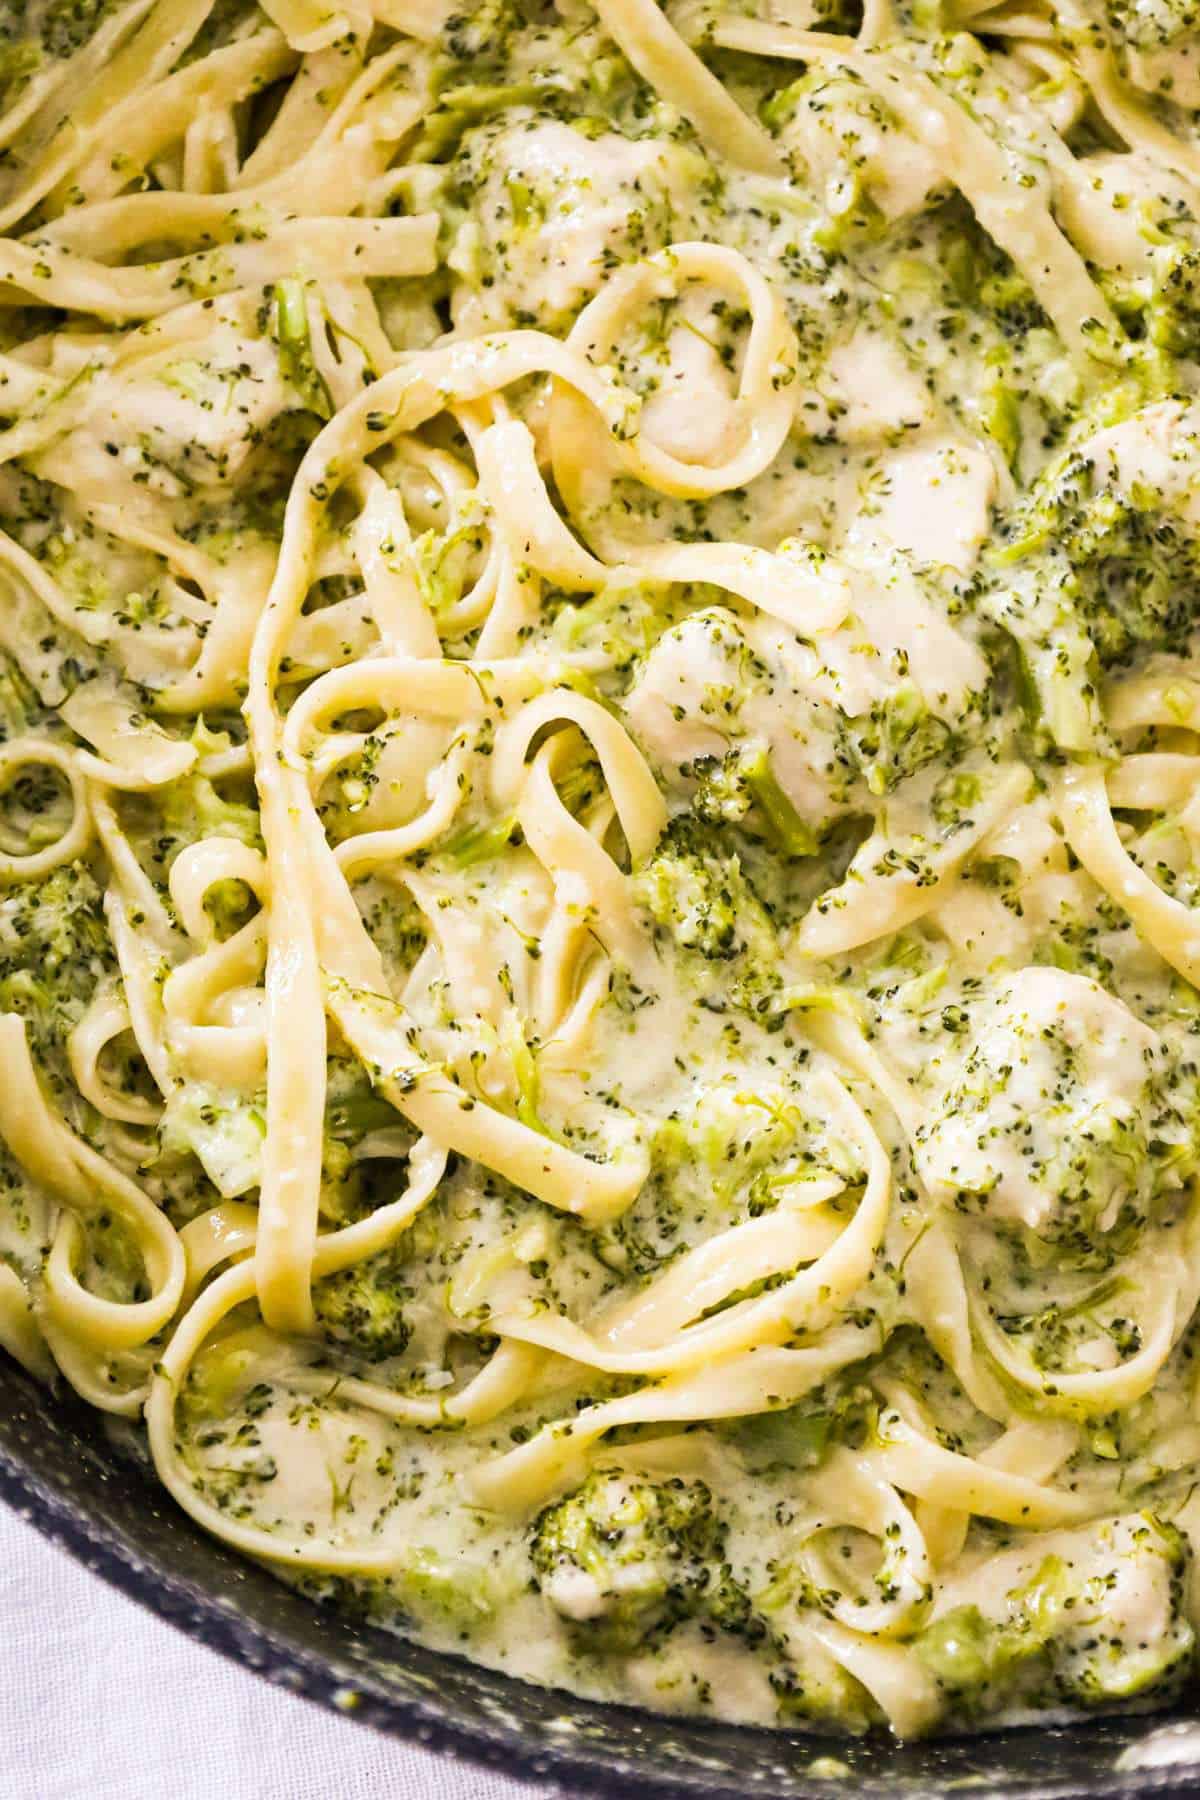 Chicken Broccoli Alfredo is a creamy garlic pasta dish loaded with chicken breast chunks, broccoli and parmesan cheese.